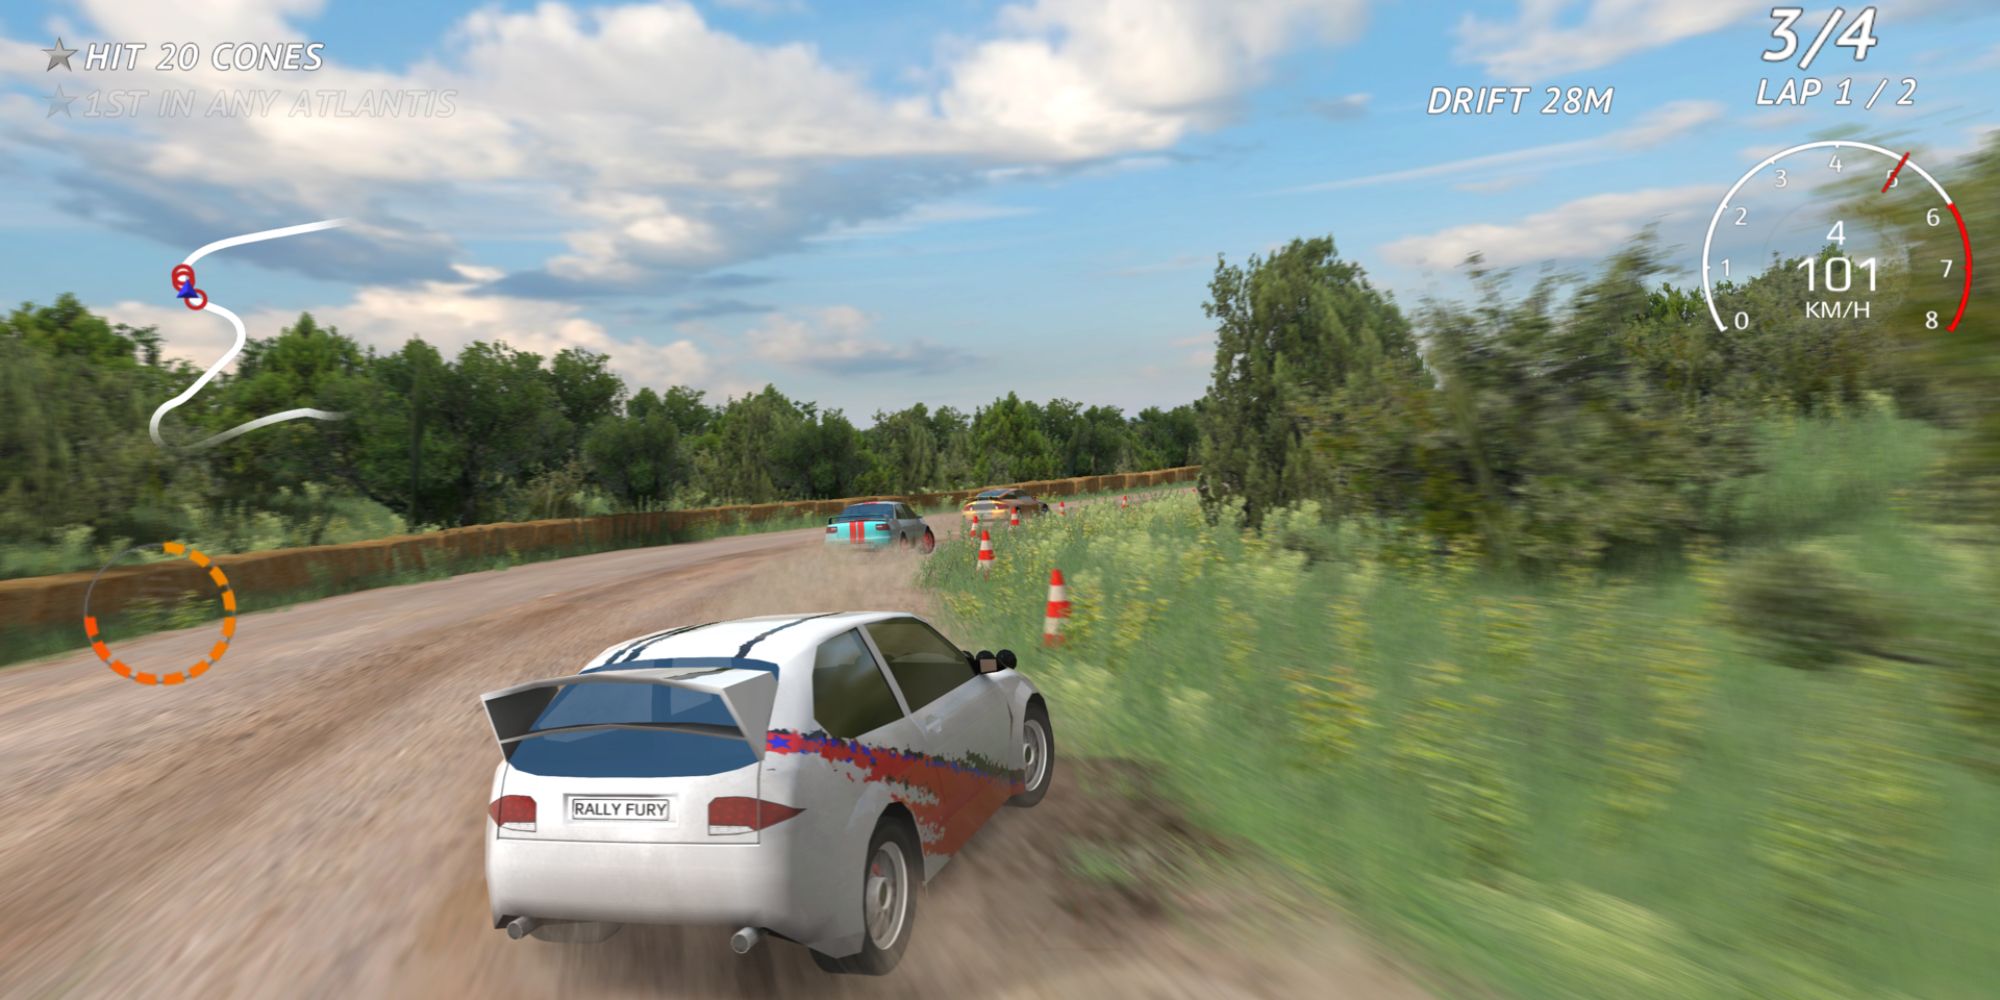 Best Racing Games on Mobile - Rally Fury - Extreme Racing - Player drifts on mud track